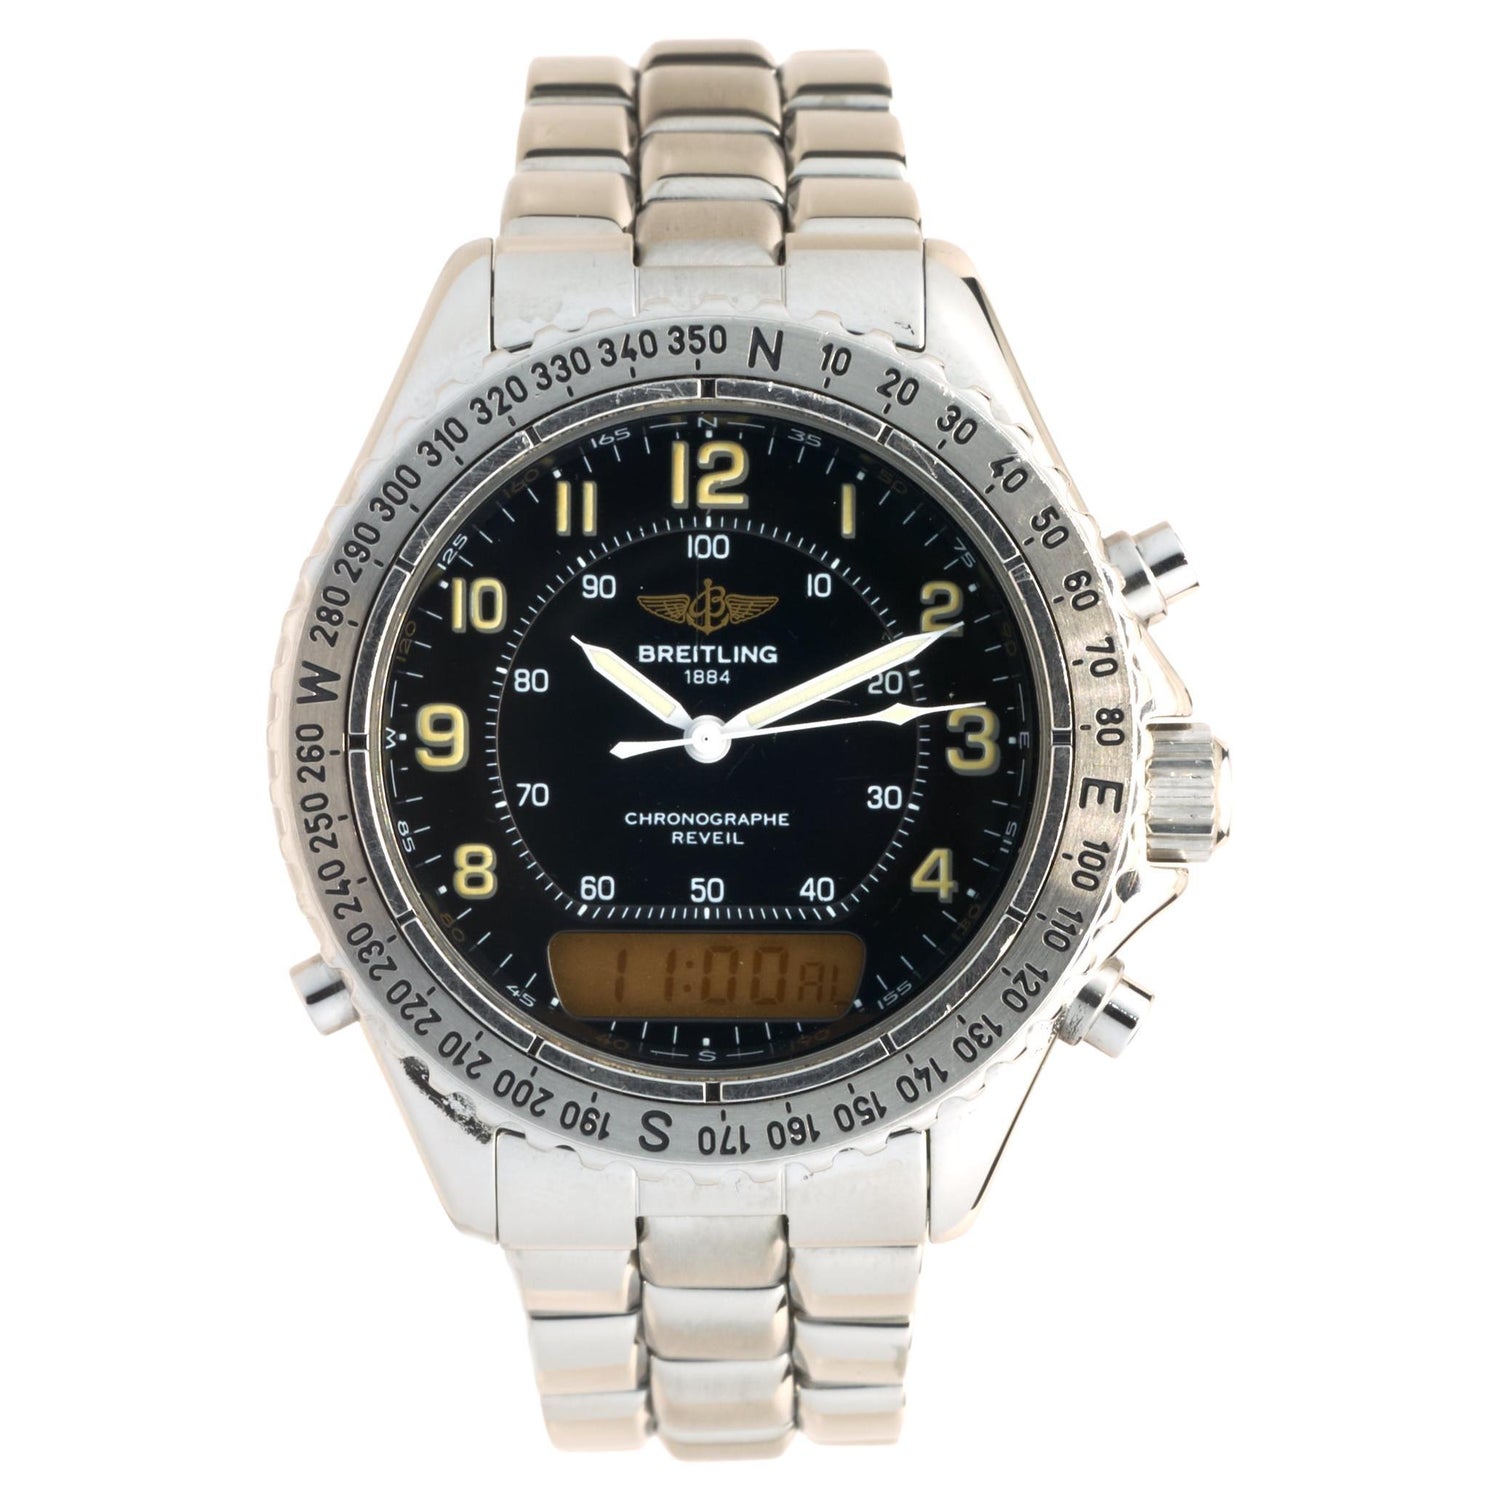 Breitling 1884 Watch - 4 For Sale on 1stDibs | breitling 1884 watch for  sale, breitling 1884 stainless steel, breitling watches 1884 price